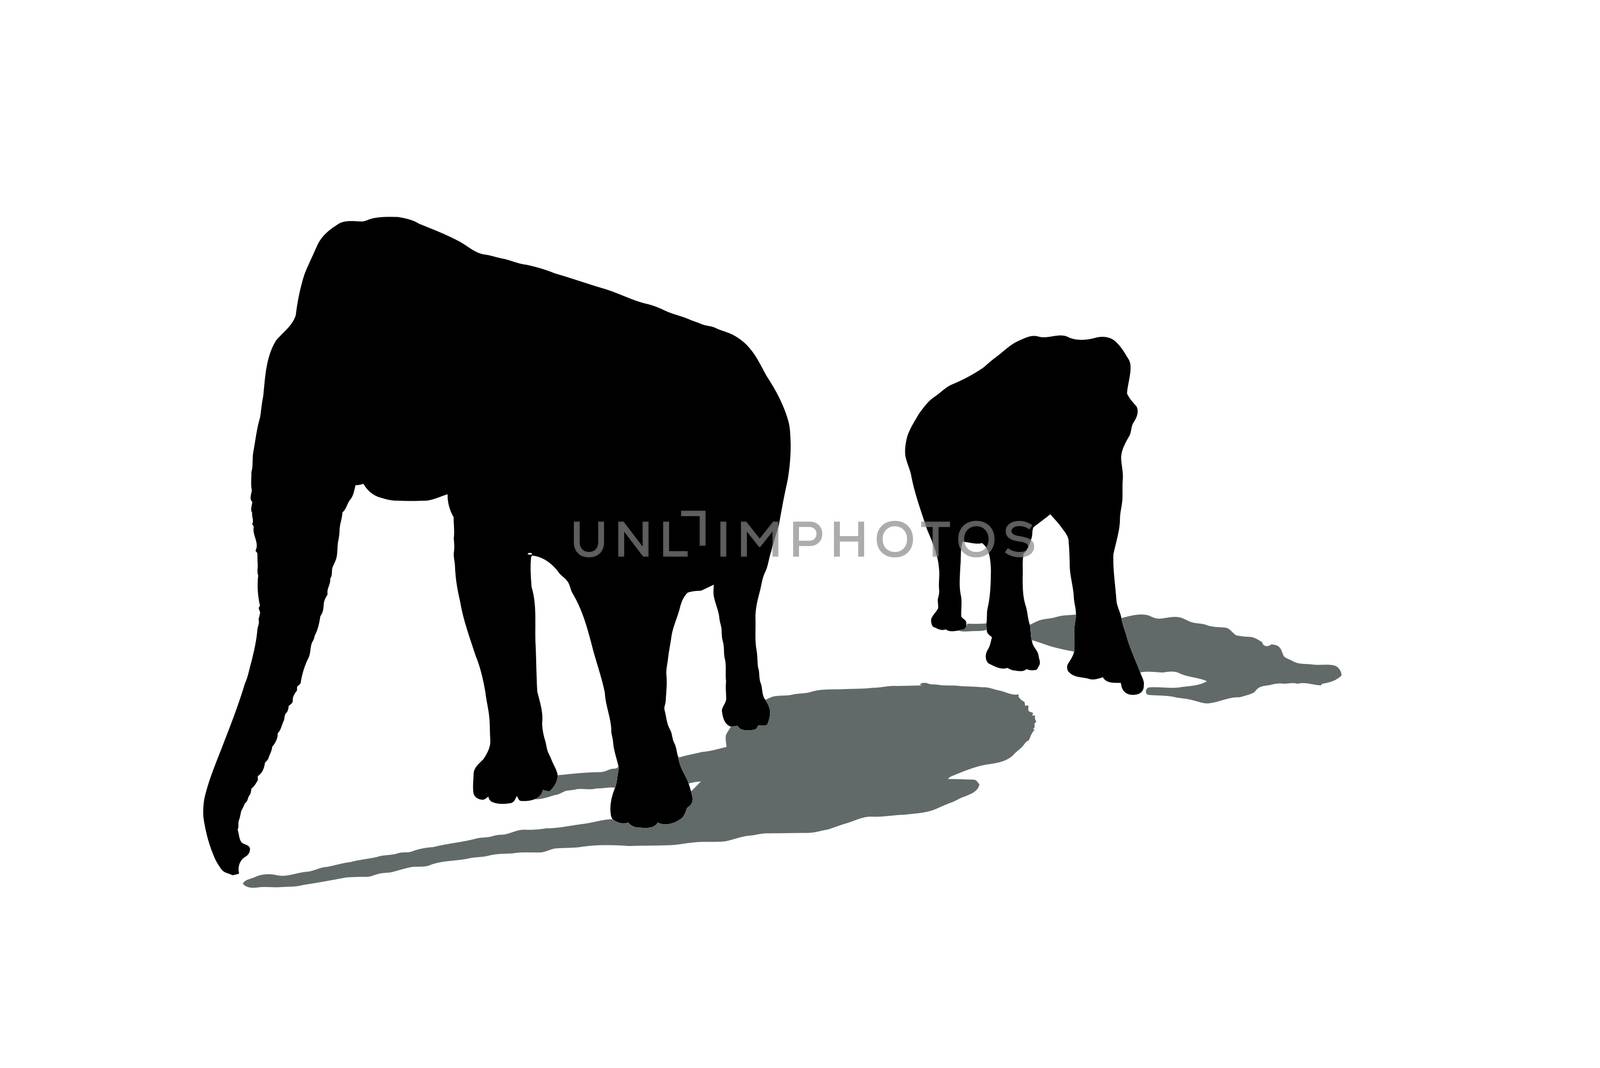 Silhouettes of two elephants with shadows isolated on white background.